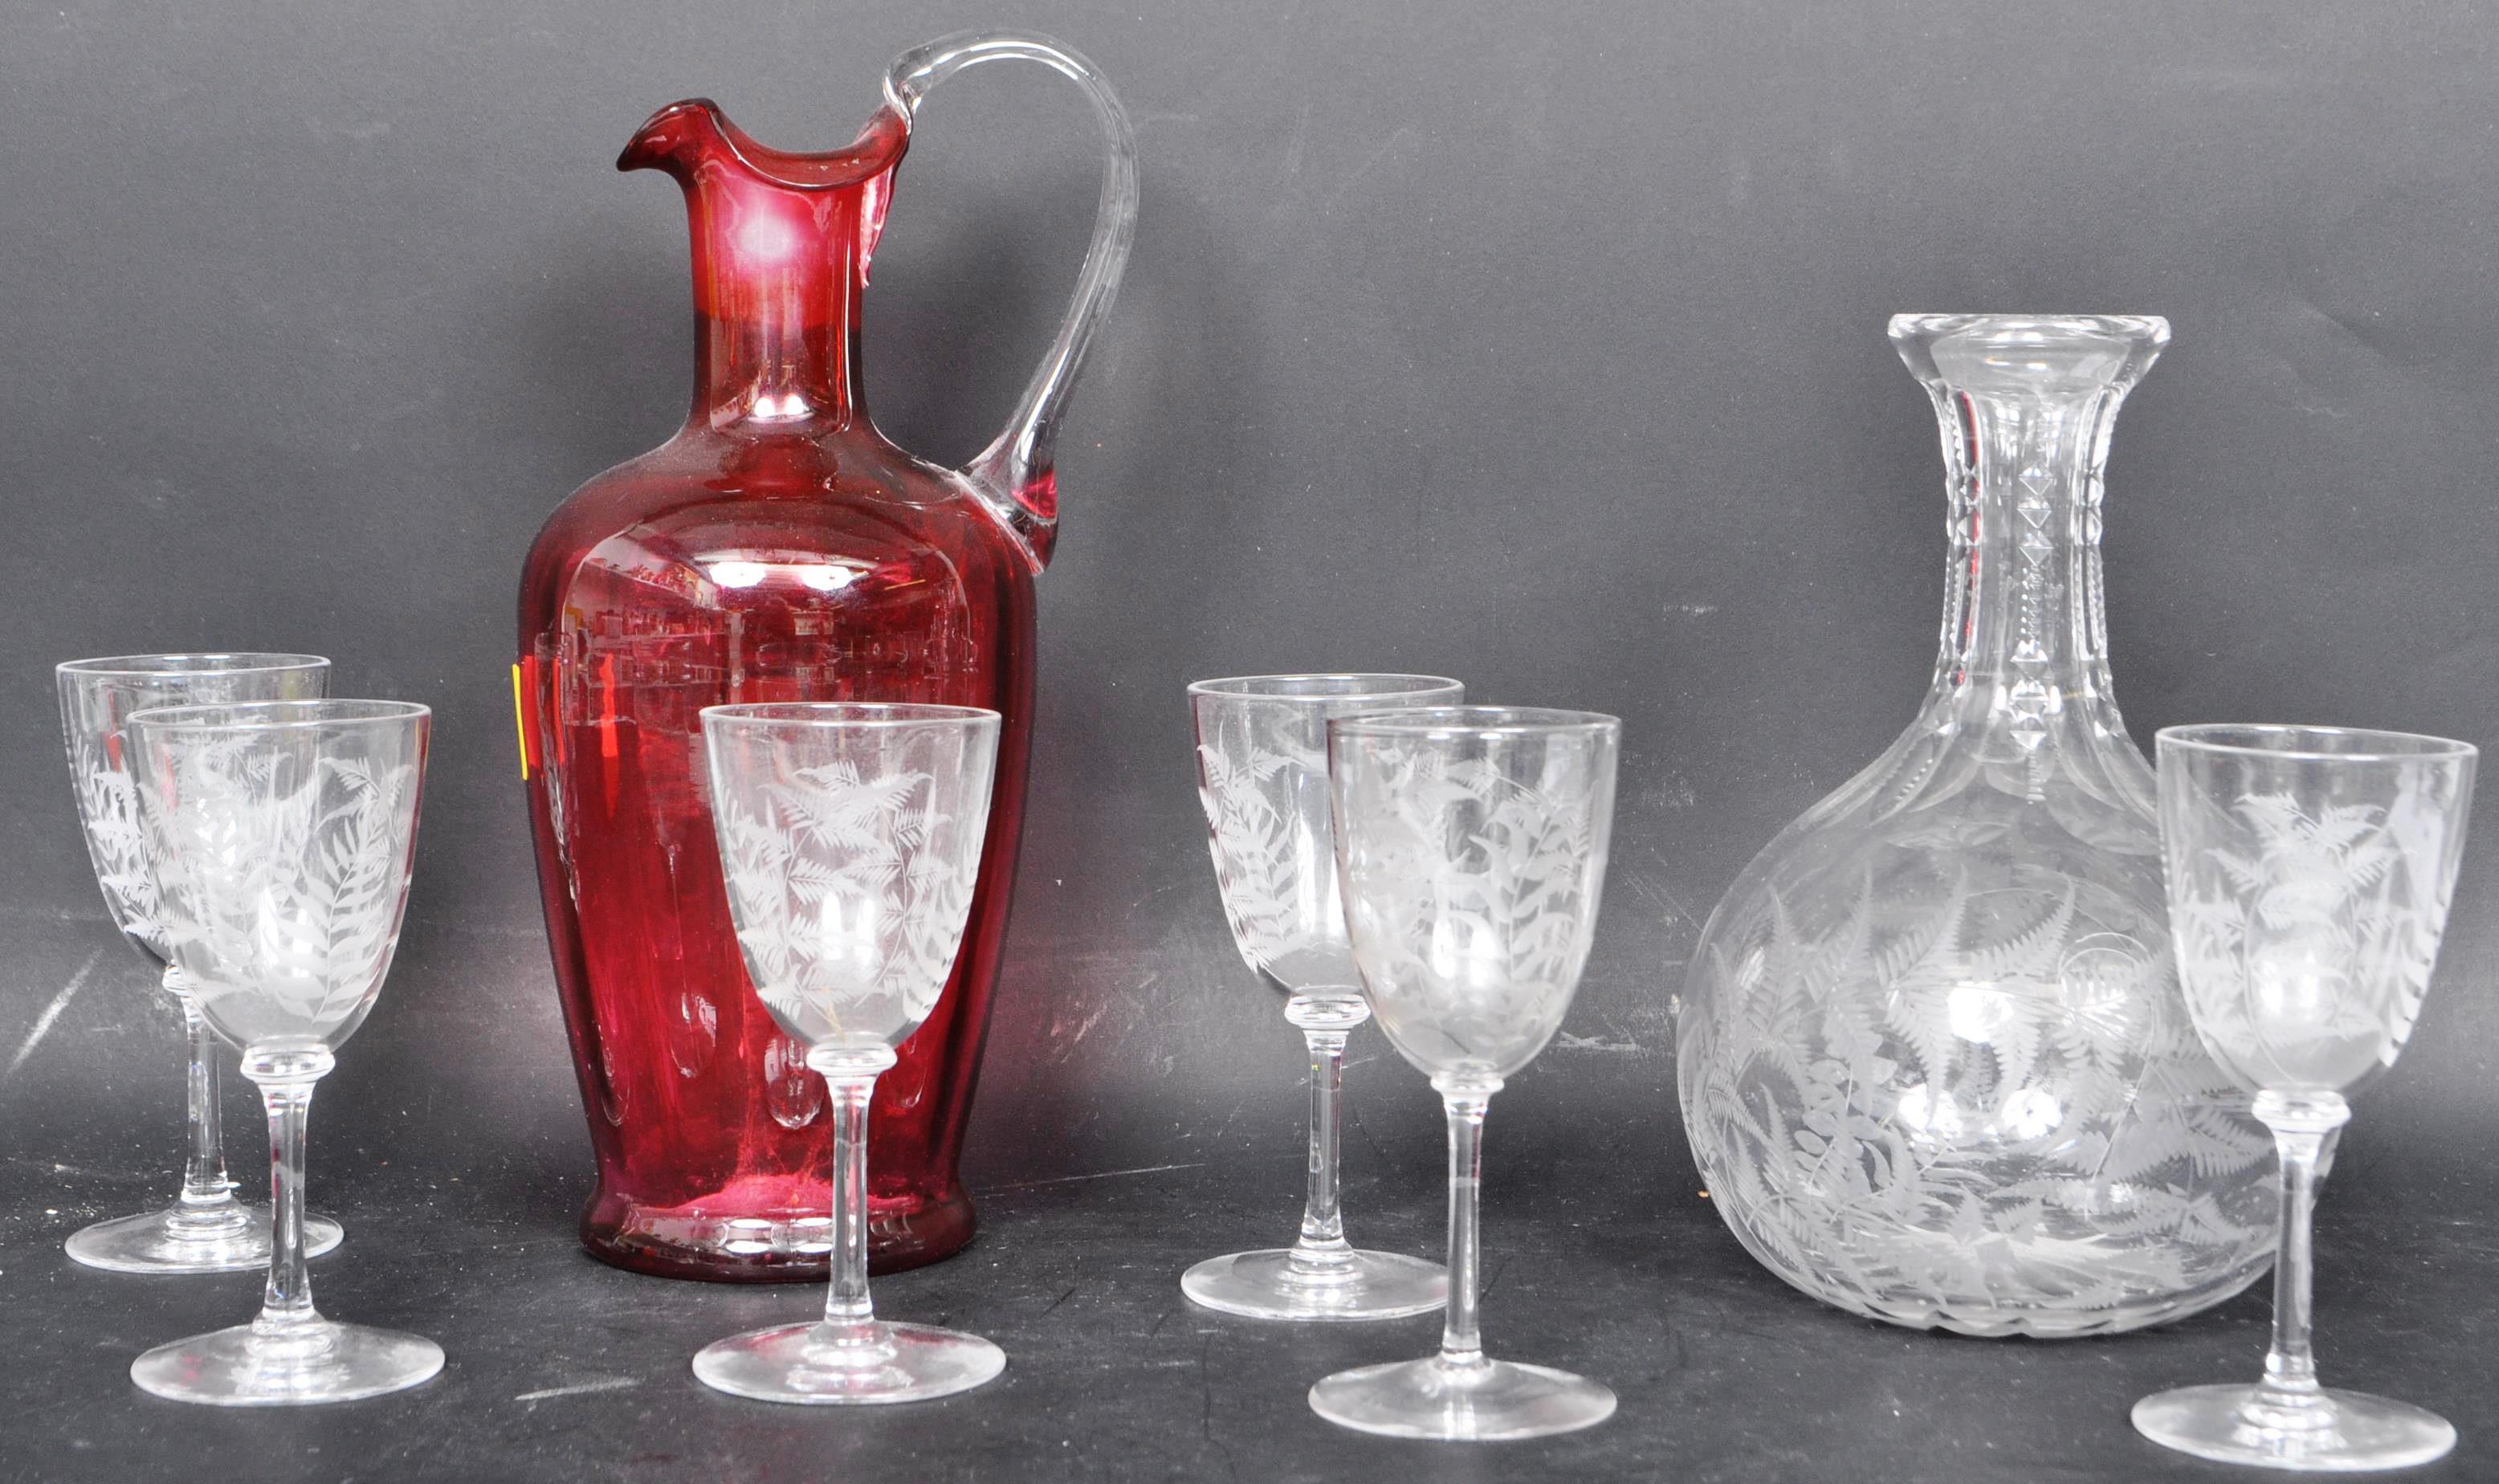 EARLY 20TH CENTURY DECANTER & SHERRY GLASSES SET